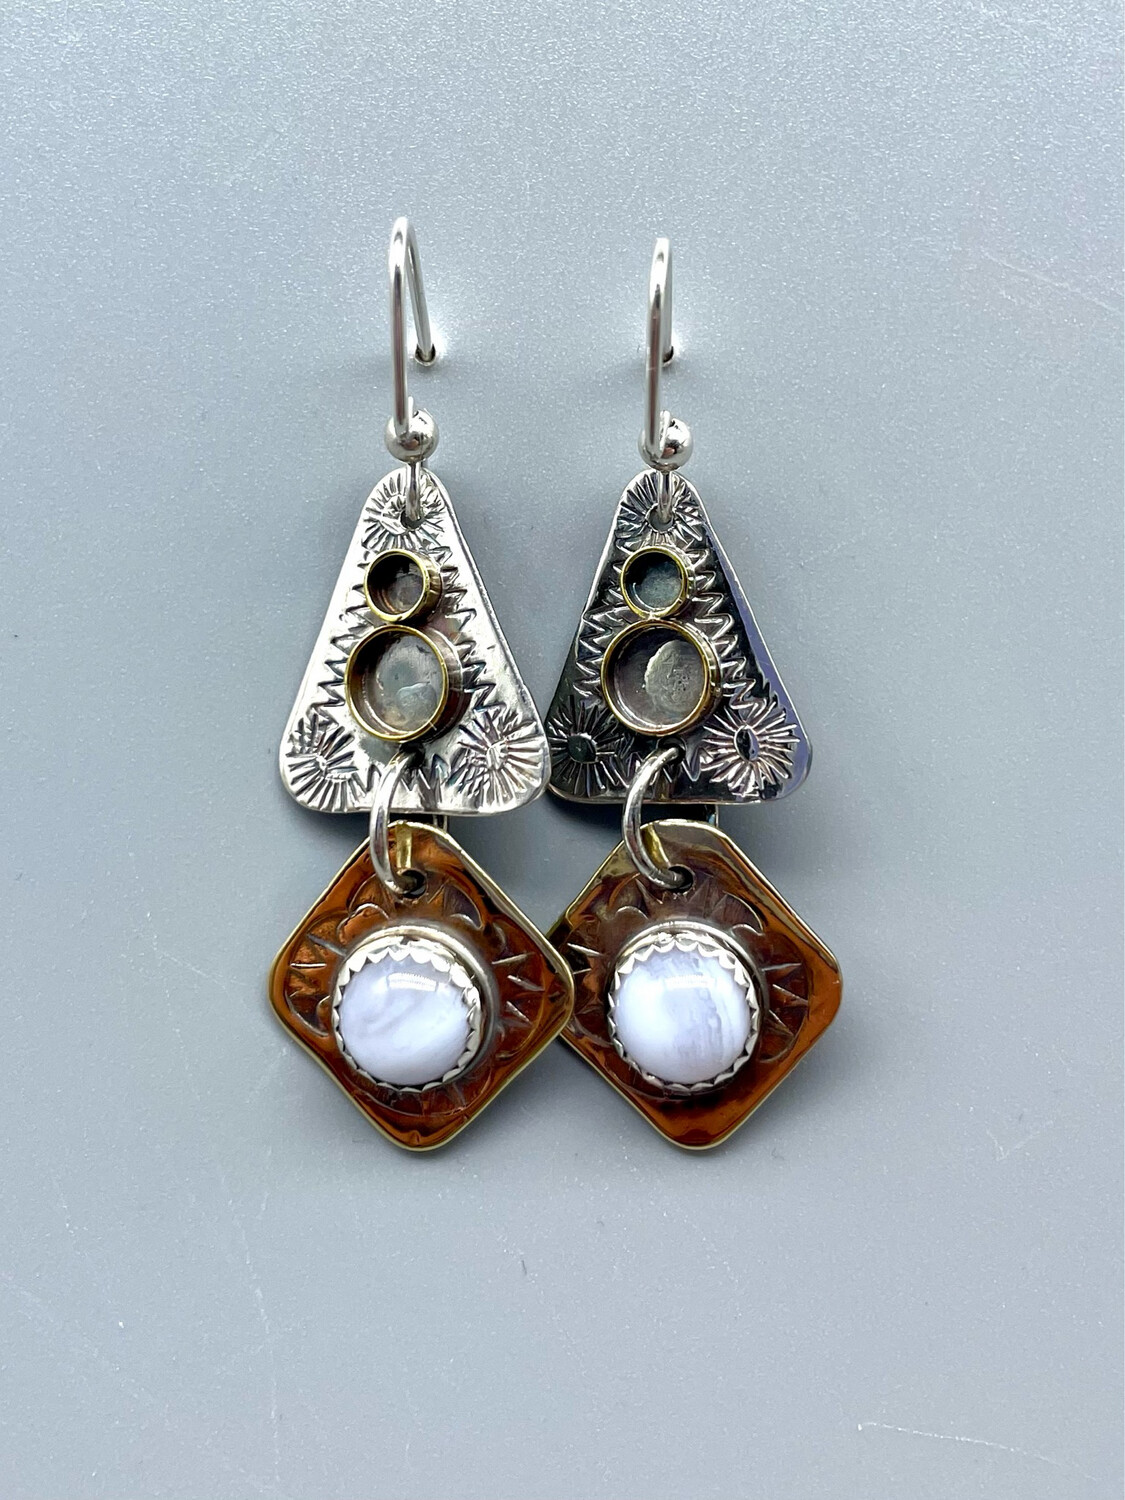 Blue Lace Agate Earrings, SS - Angela Duffin, Haverton PA